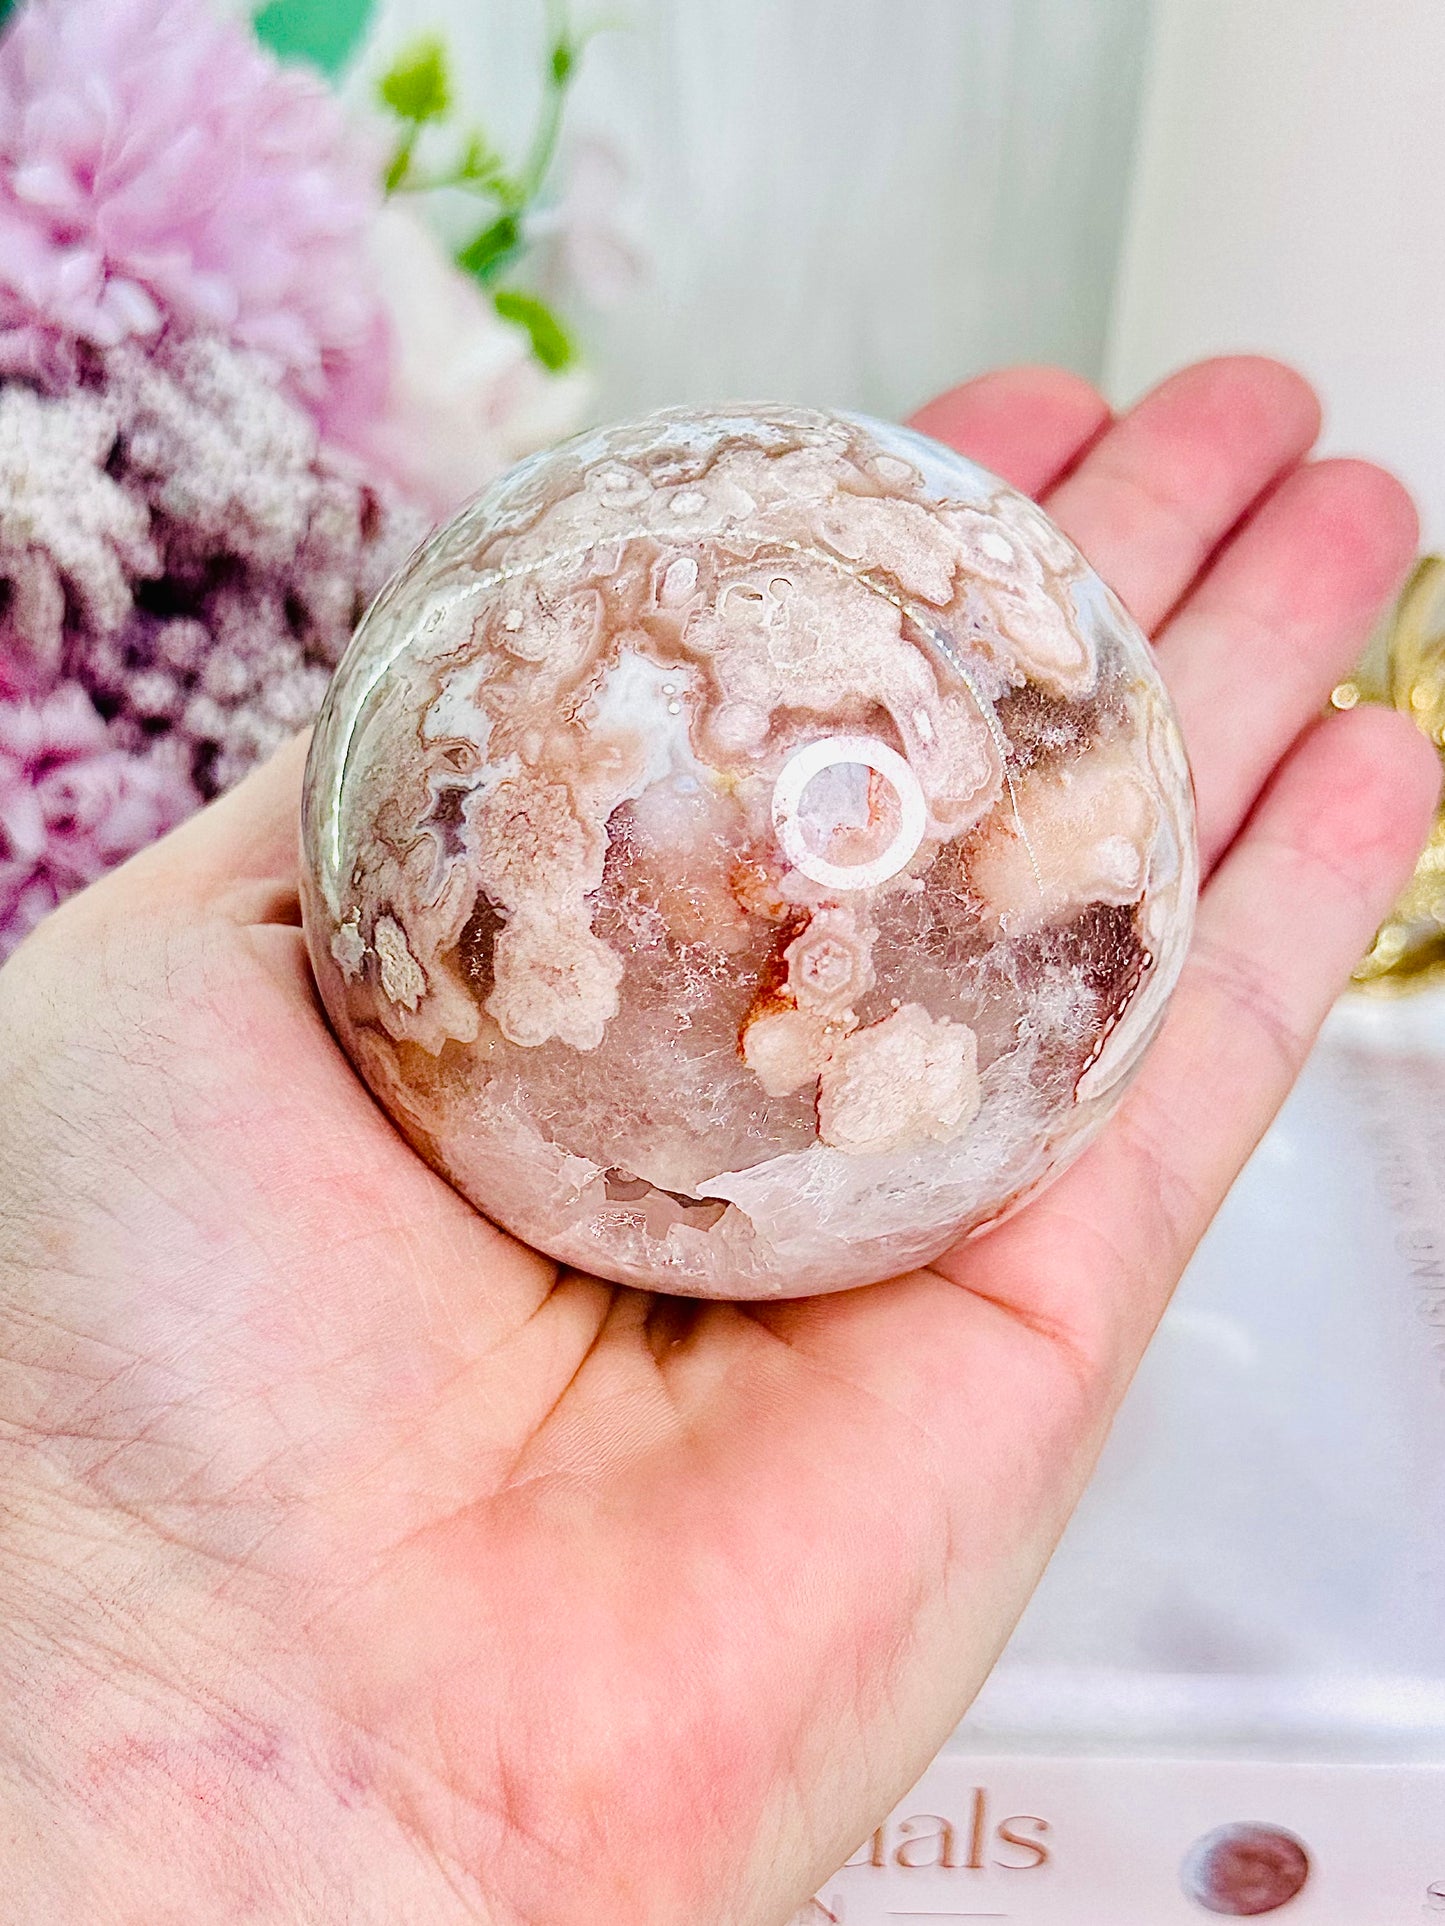 Absolutely Divine 395gram Druzy Flower Agate Stunning Sphere From Madagascar ~Comes on Silver Stand (glass stand in pic is display only)